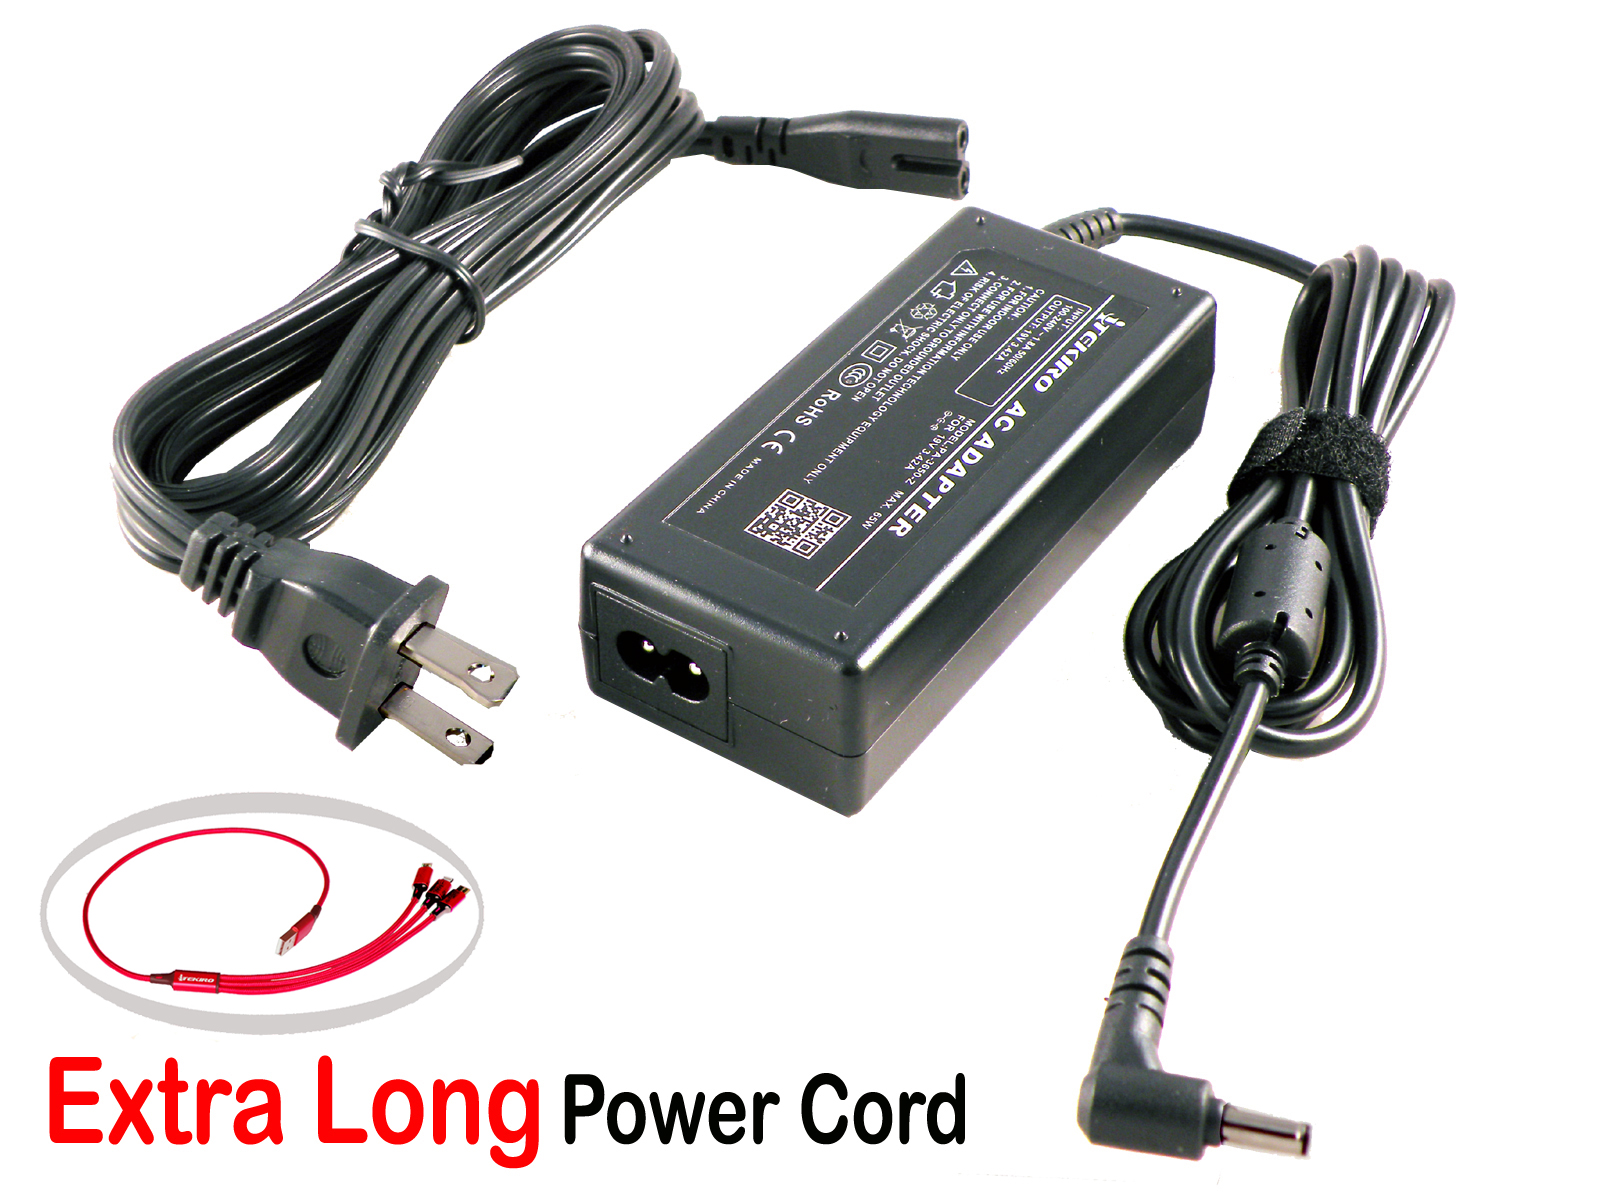 Laptop AC Adapter for Asus F505ZA-DB31 F505ZA-DH51 F510QA F510QA-WB91 F512DA F512DA-DB34 F512DA-EB51 F512DA-EB55 F512DA-EB55-BL F512DA-EB55-CL F512DA-EB55-SL F512DA-PB31 F512DA-PB31-BL F512DA-PB31-CL - image 1 of 6